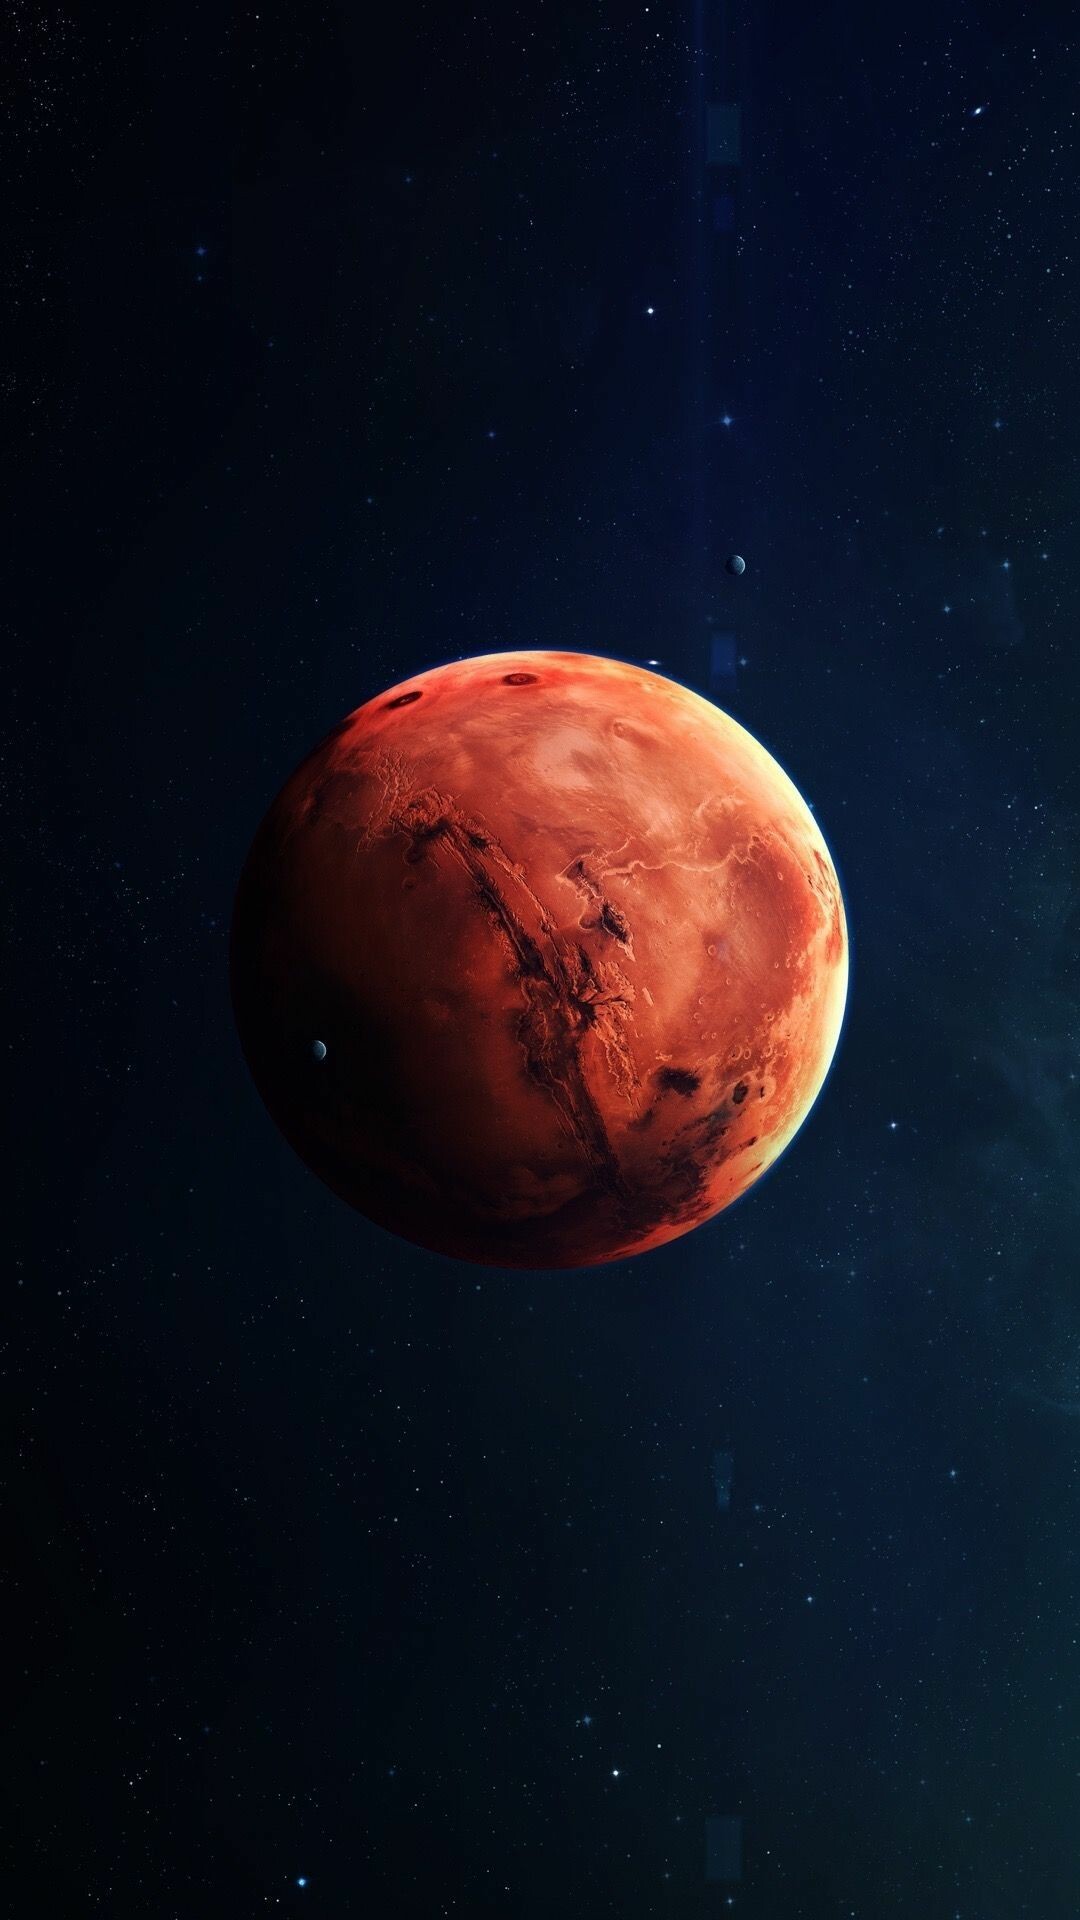 Mars: The planet is the second closest to Earth, after Venus. 1080x1920 Full HD Wallpaper.